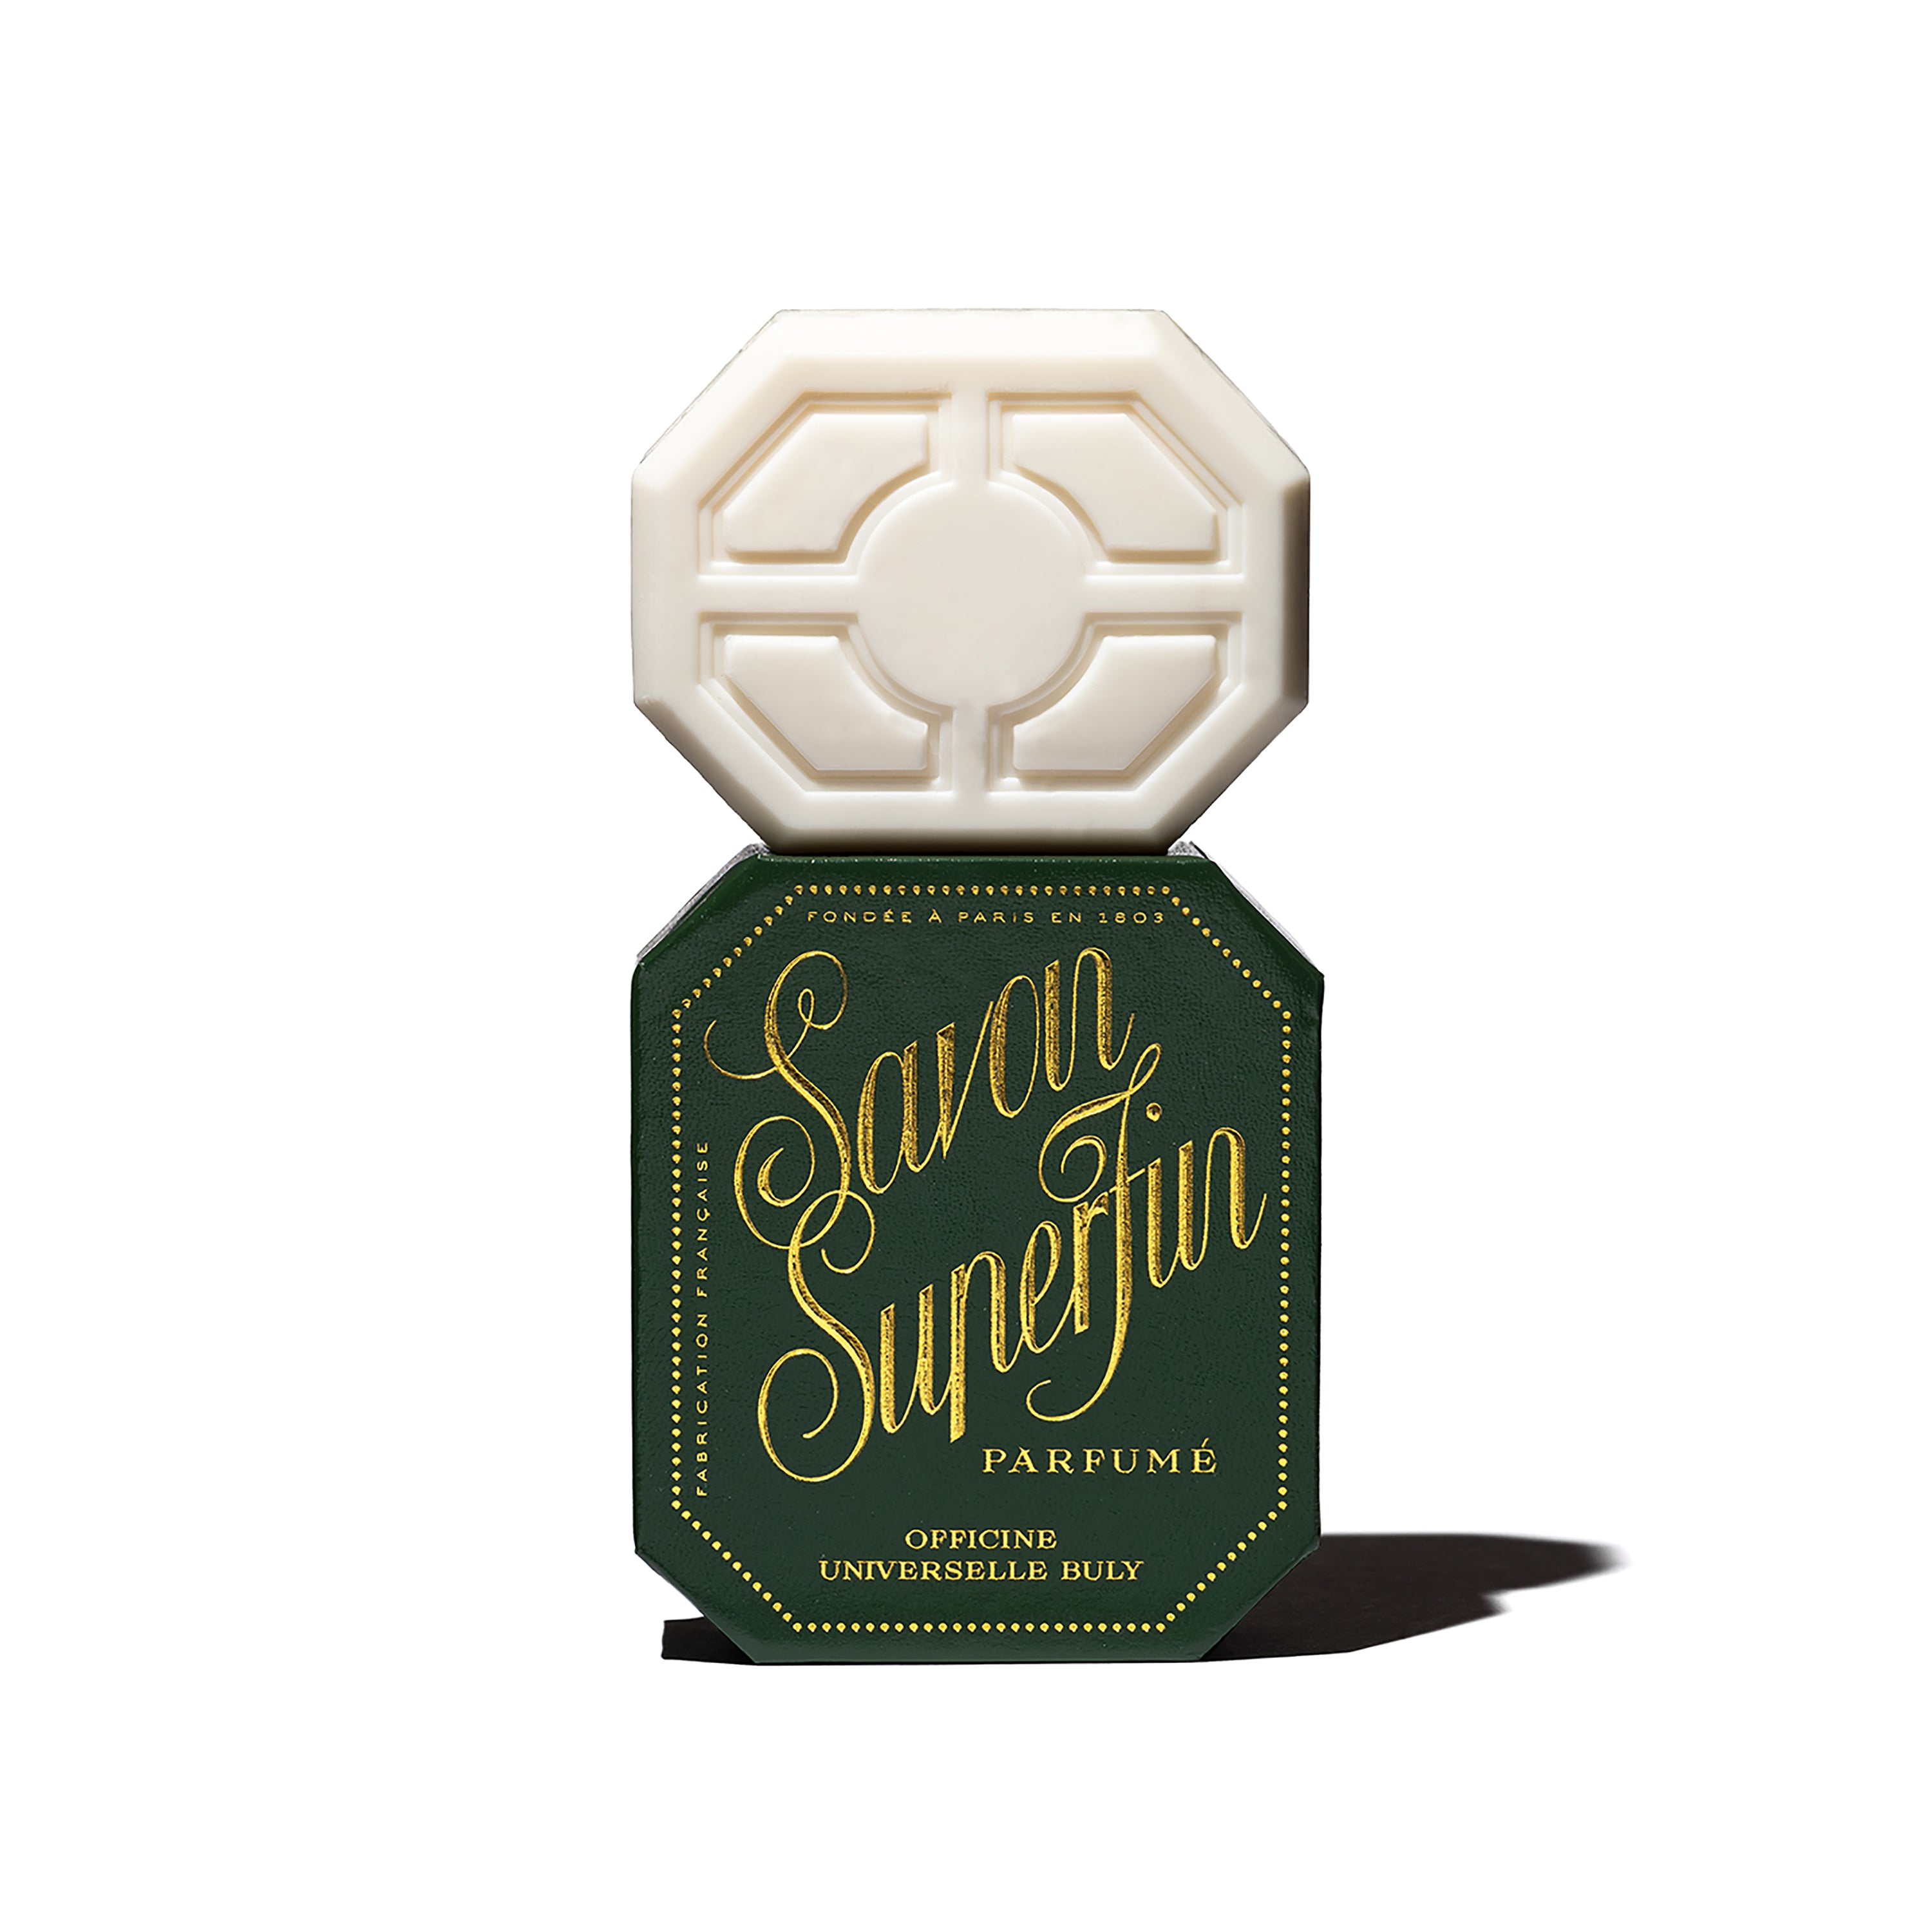 Savon Superfin Indian cucumber and Syrian mint - Buly 1803